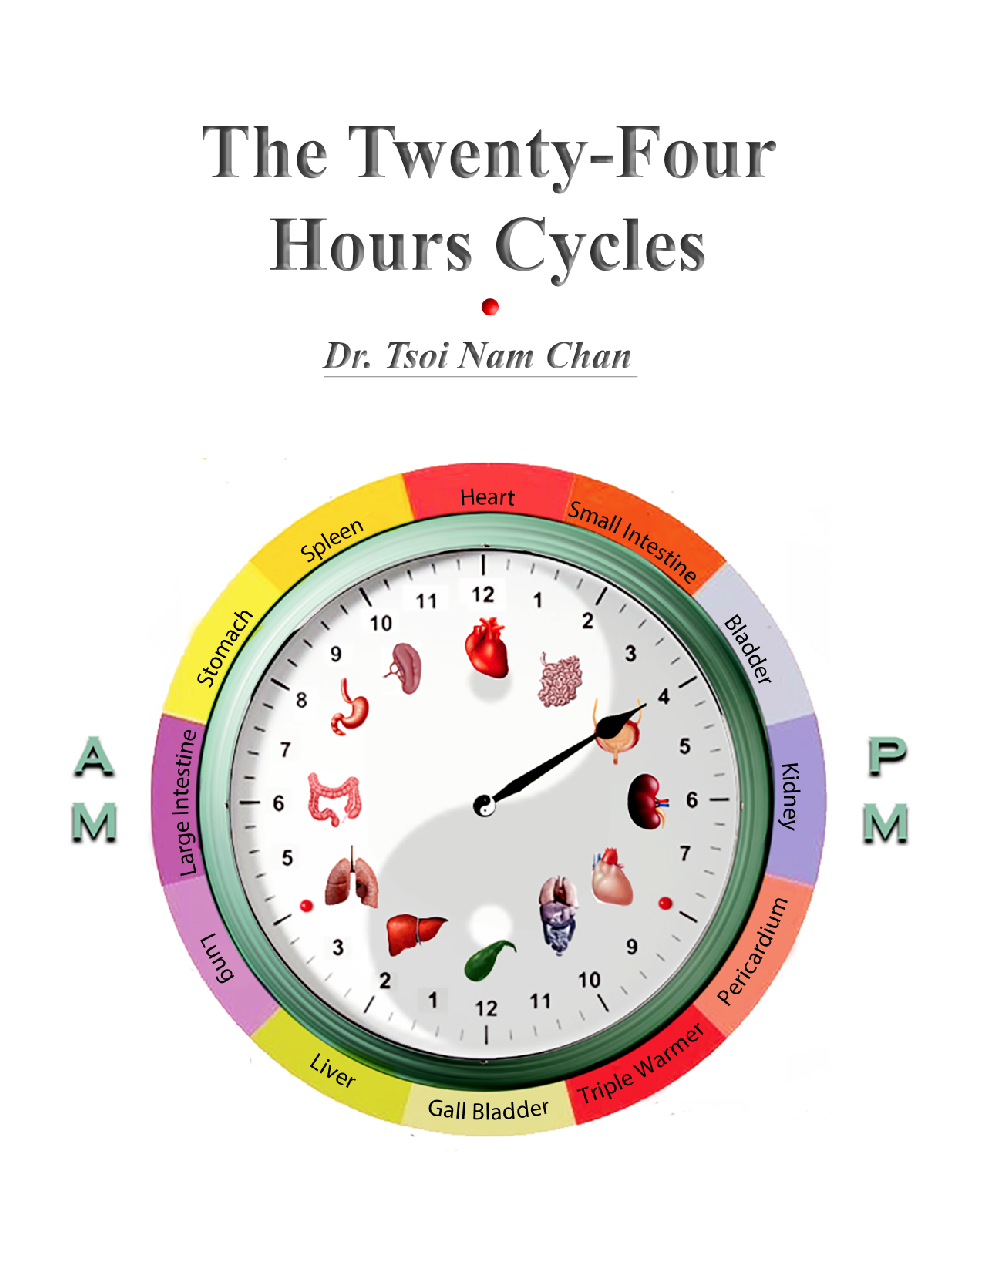 The Twenty-Four Hours Cycles